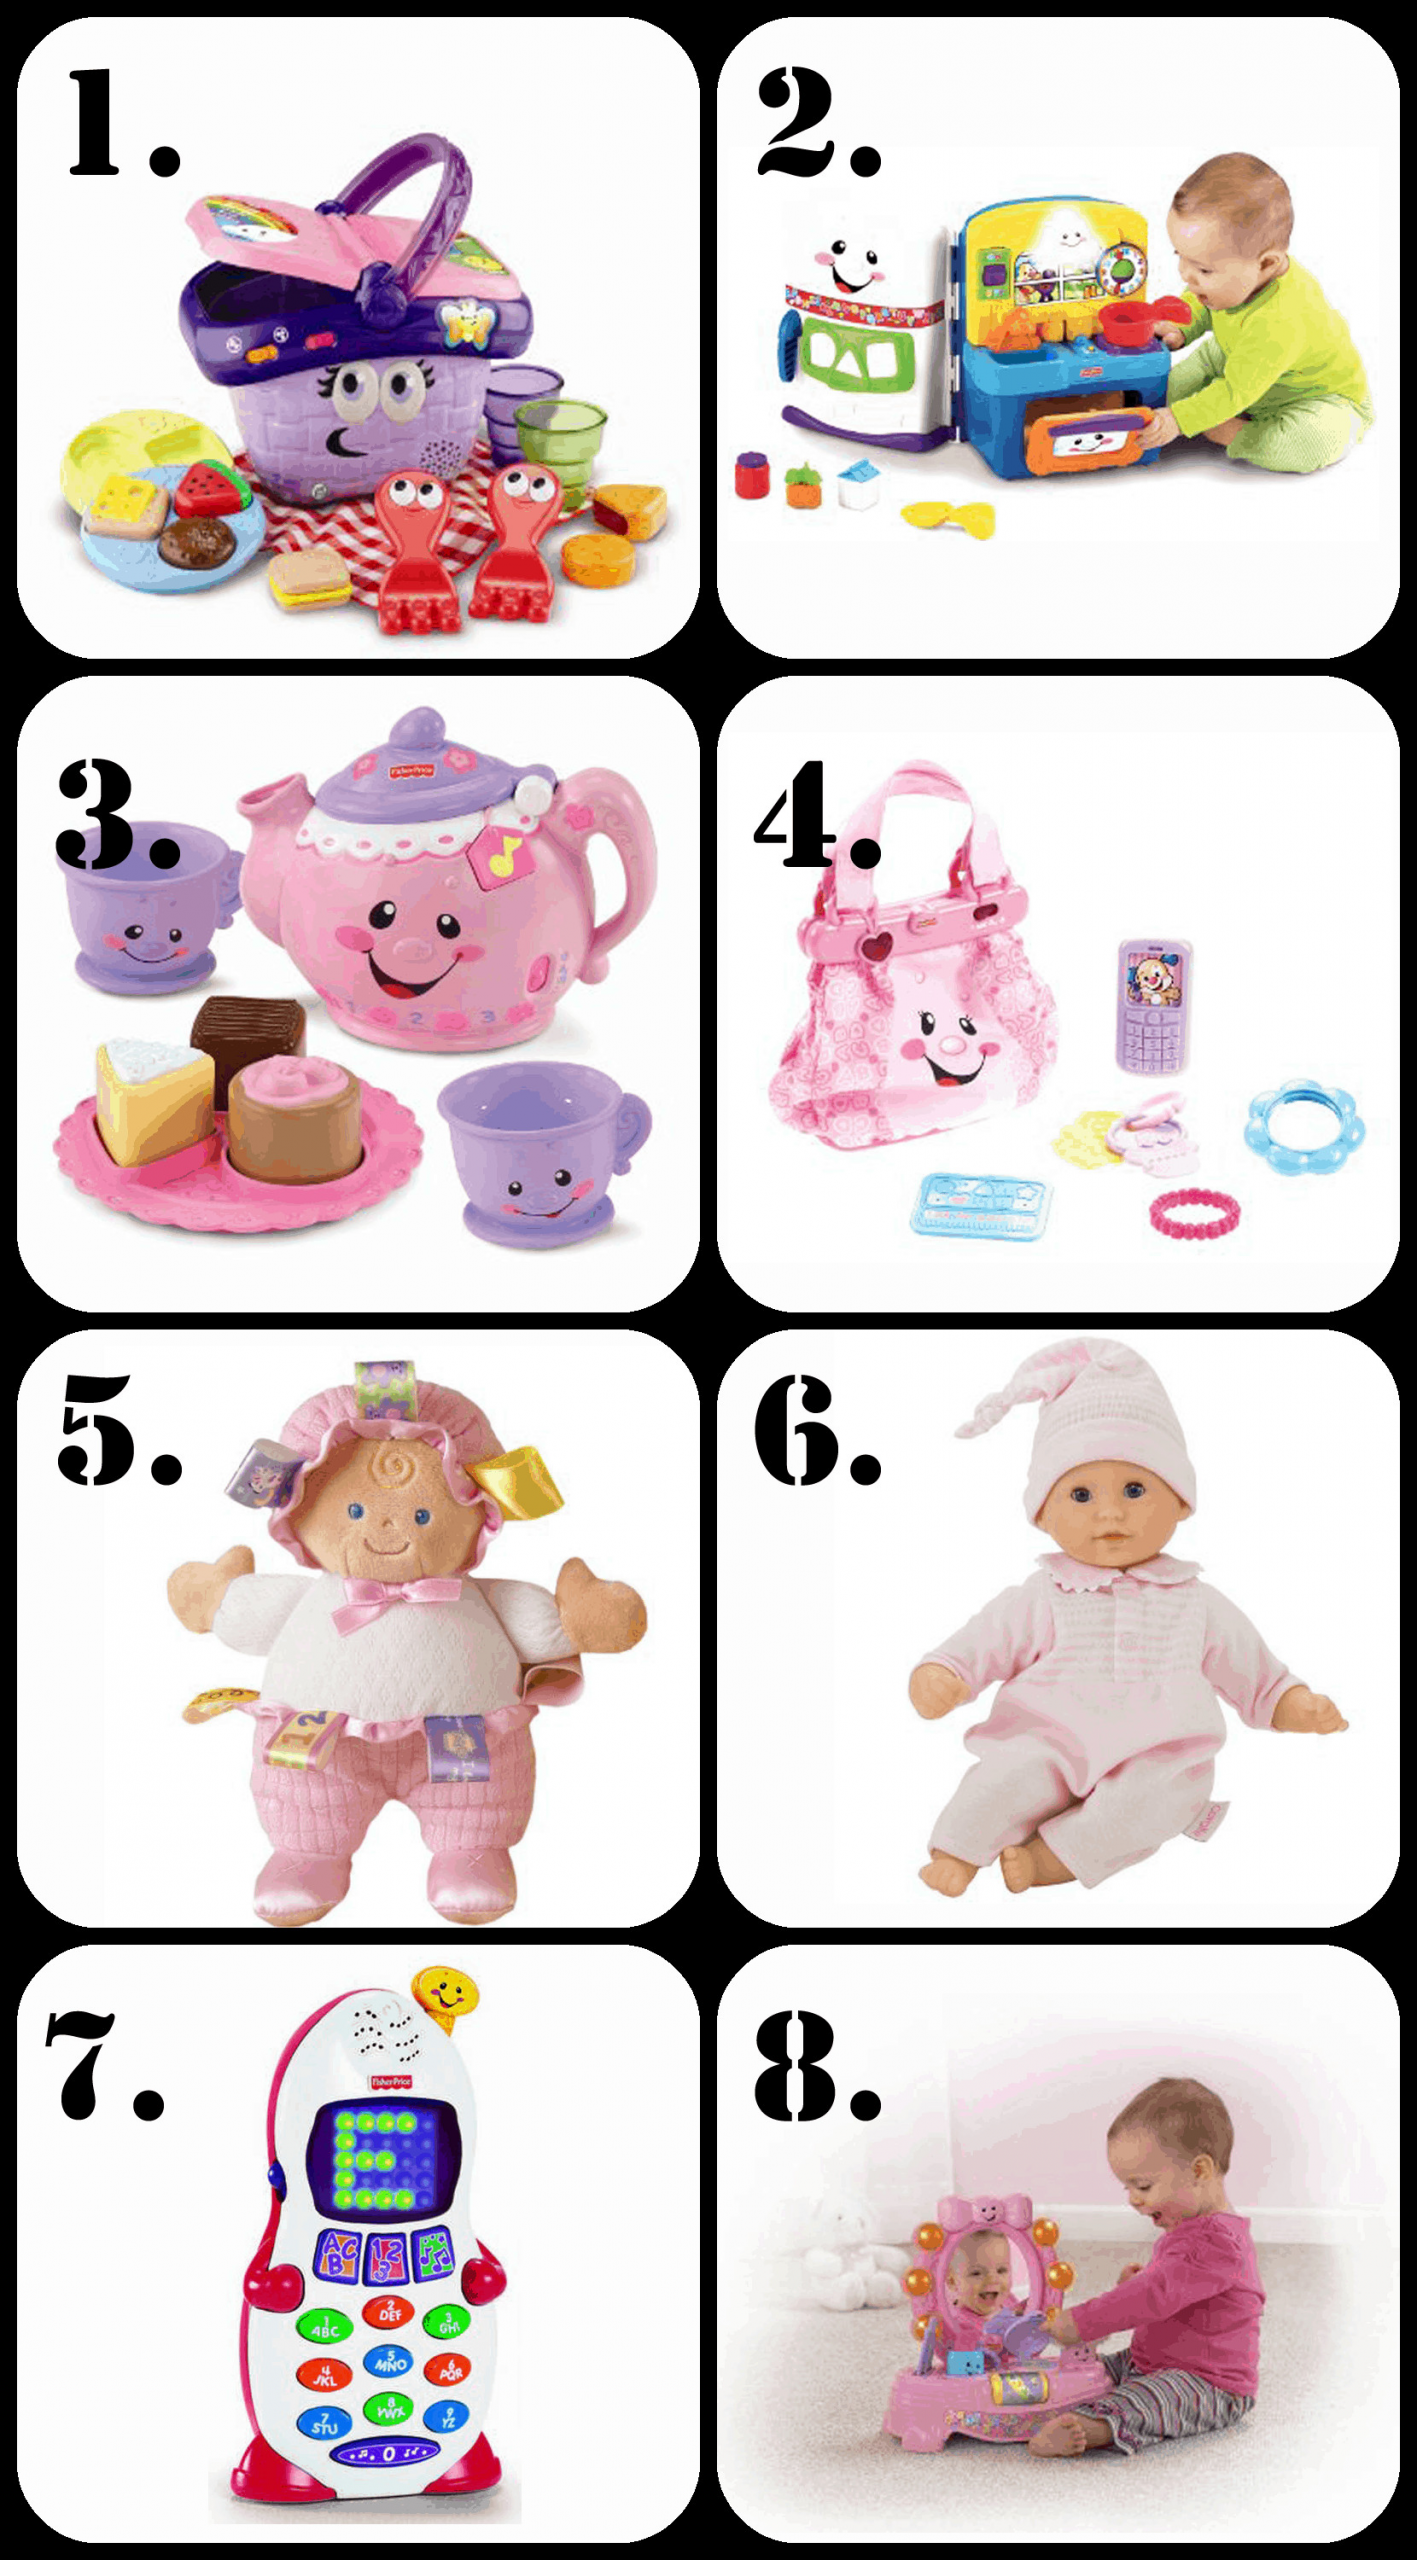 One Year Old Baby Girl Gift Ideas
 BEST Gifts for a 1 Year Old Girl • The Pinning Mama